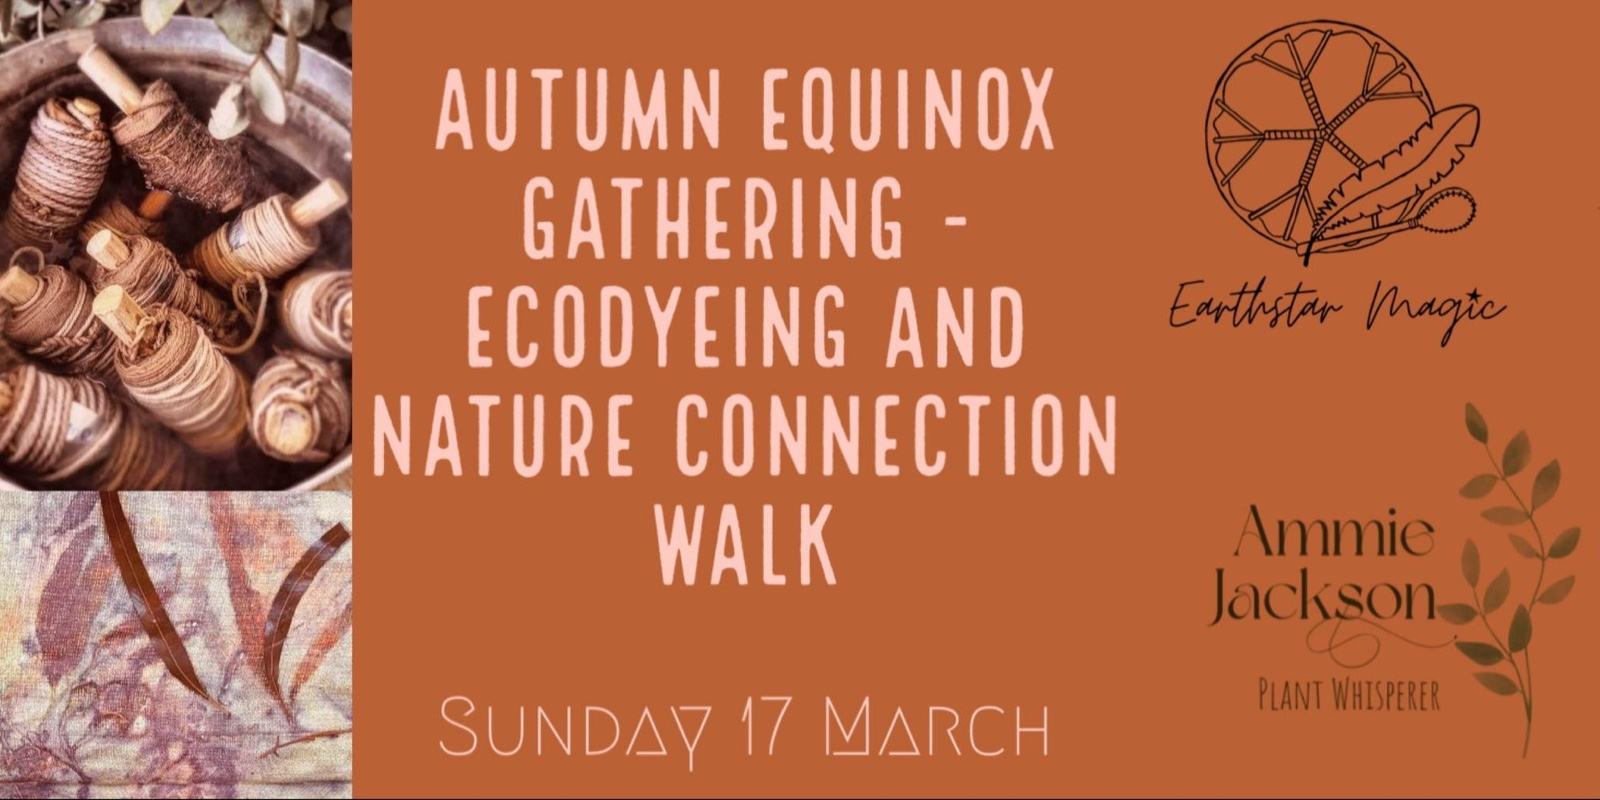 Banner image for Autumn Equinox Gathering - Eco Dyeing & Nature Connection Walk